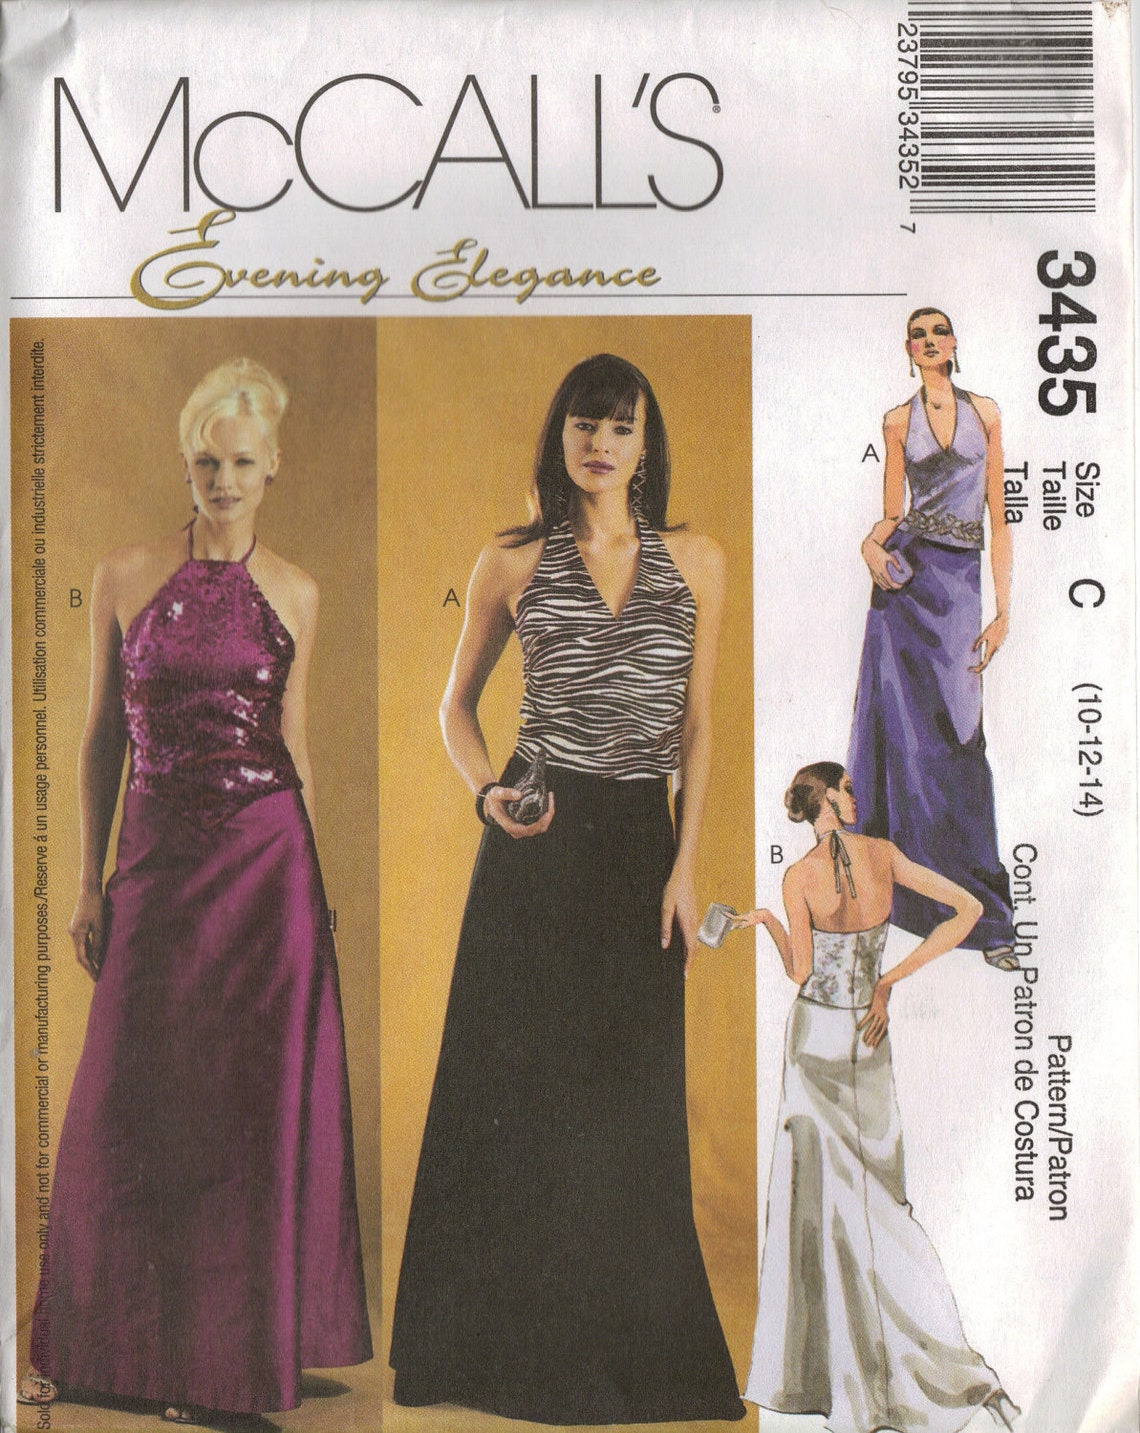 Mccall's evening Elegance Sewing Pattern 3435 Misses' Lined Tops ...